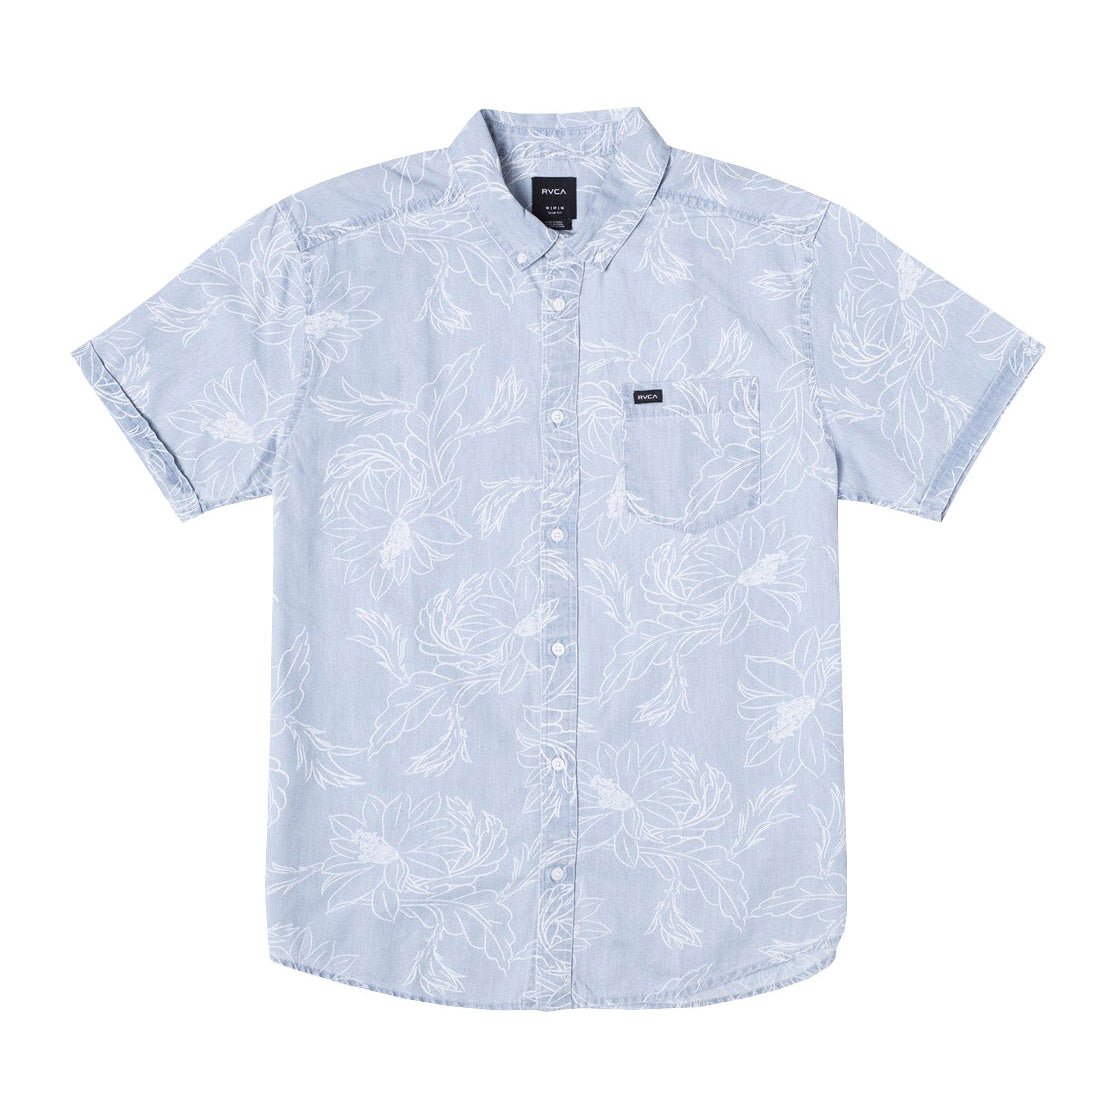 RVCA Hastings Floral SS Shirt DEN M